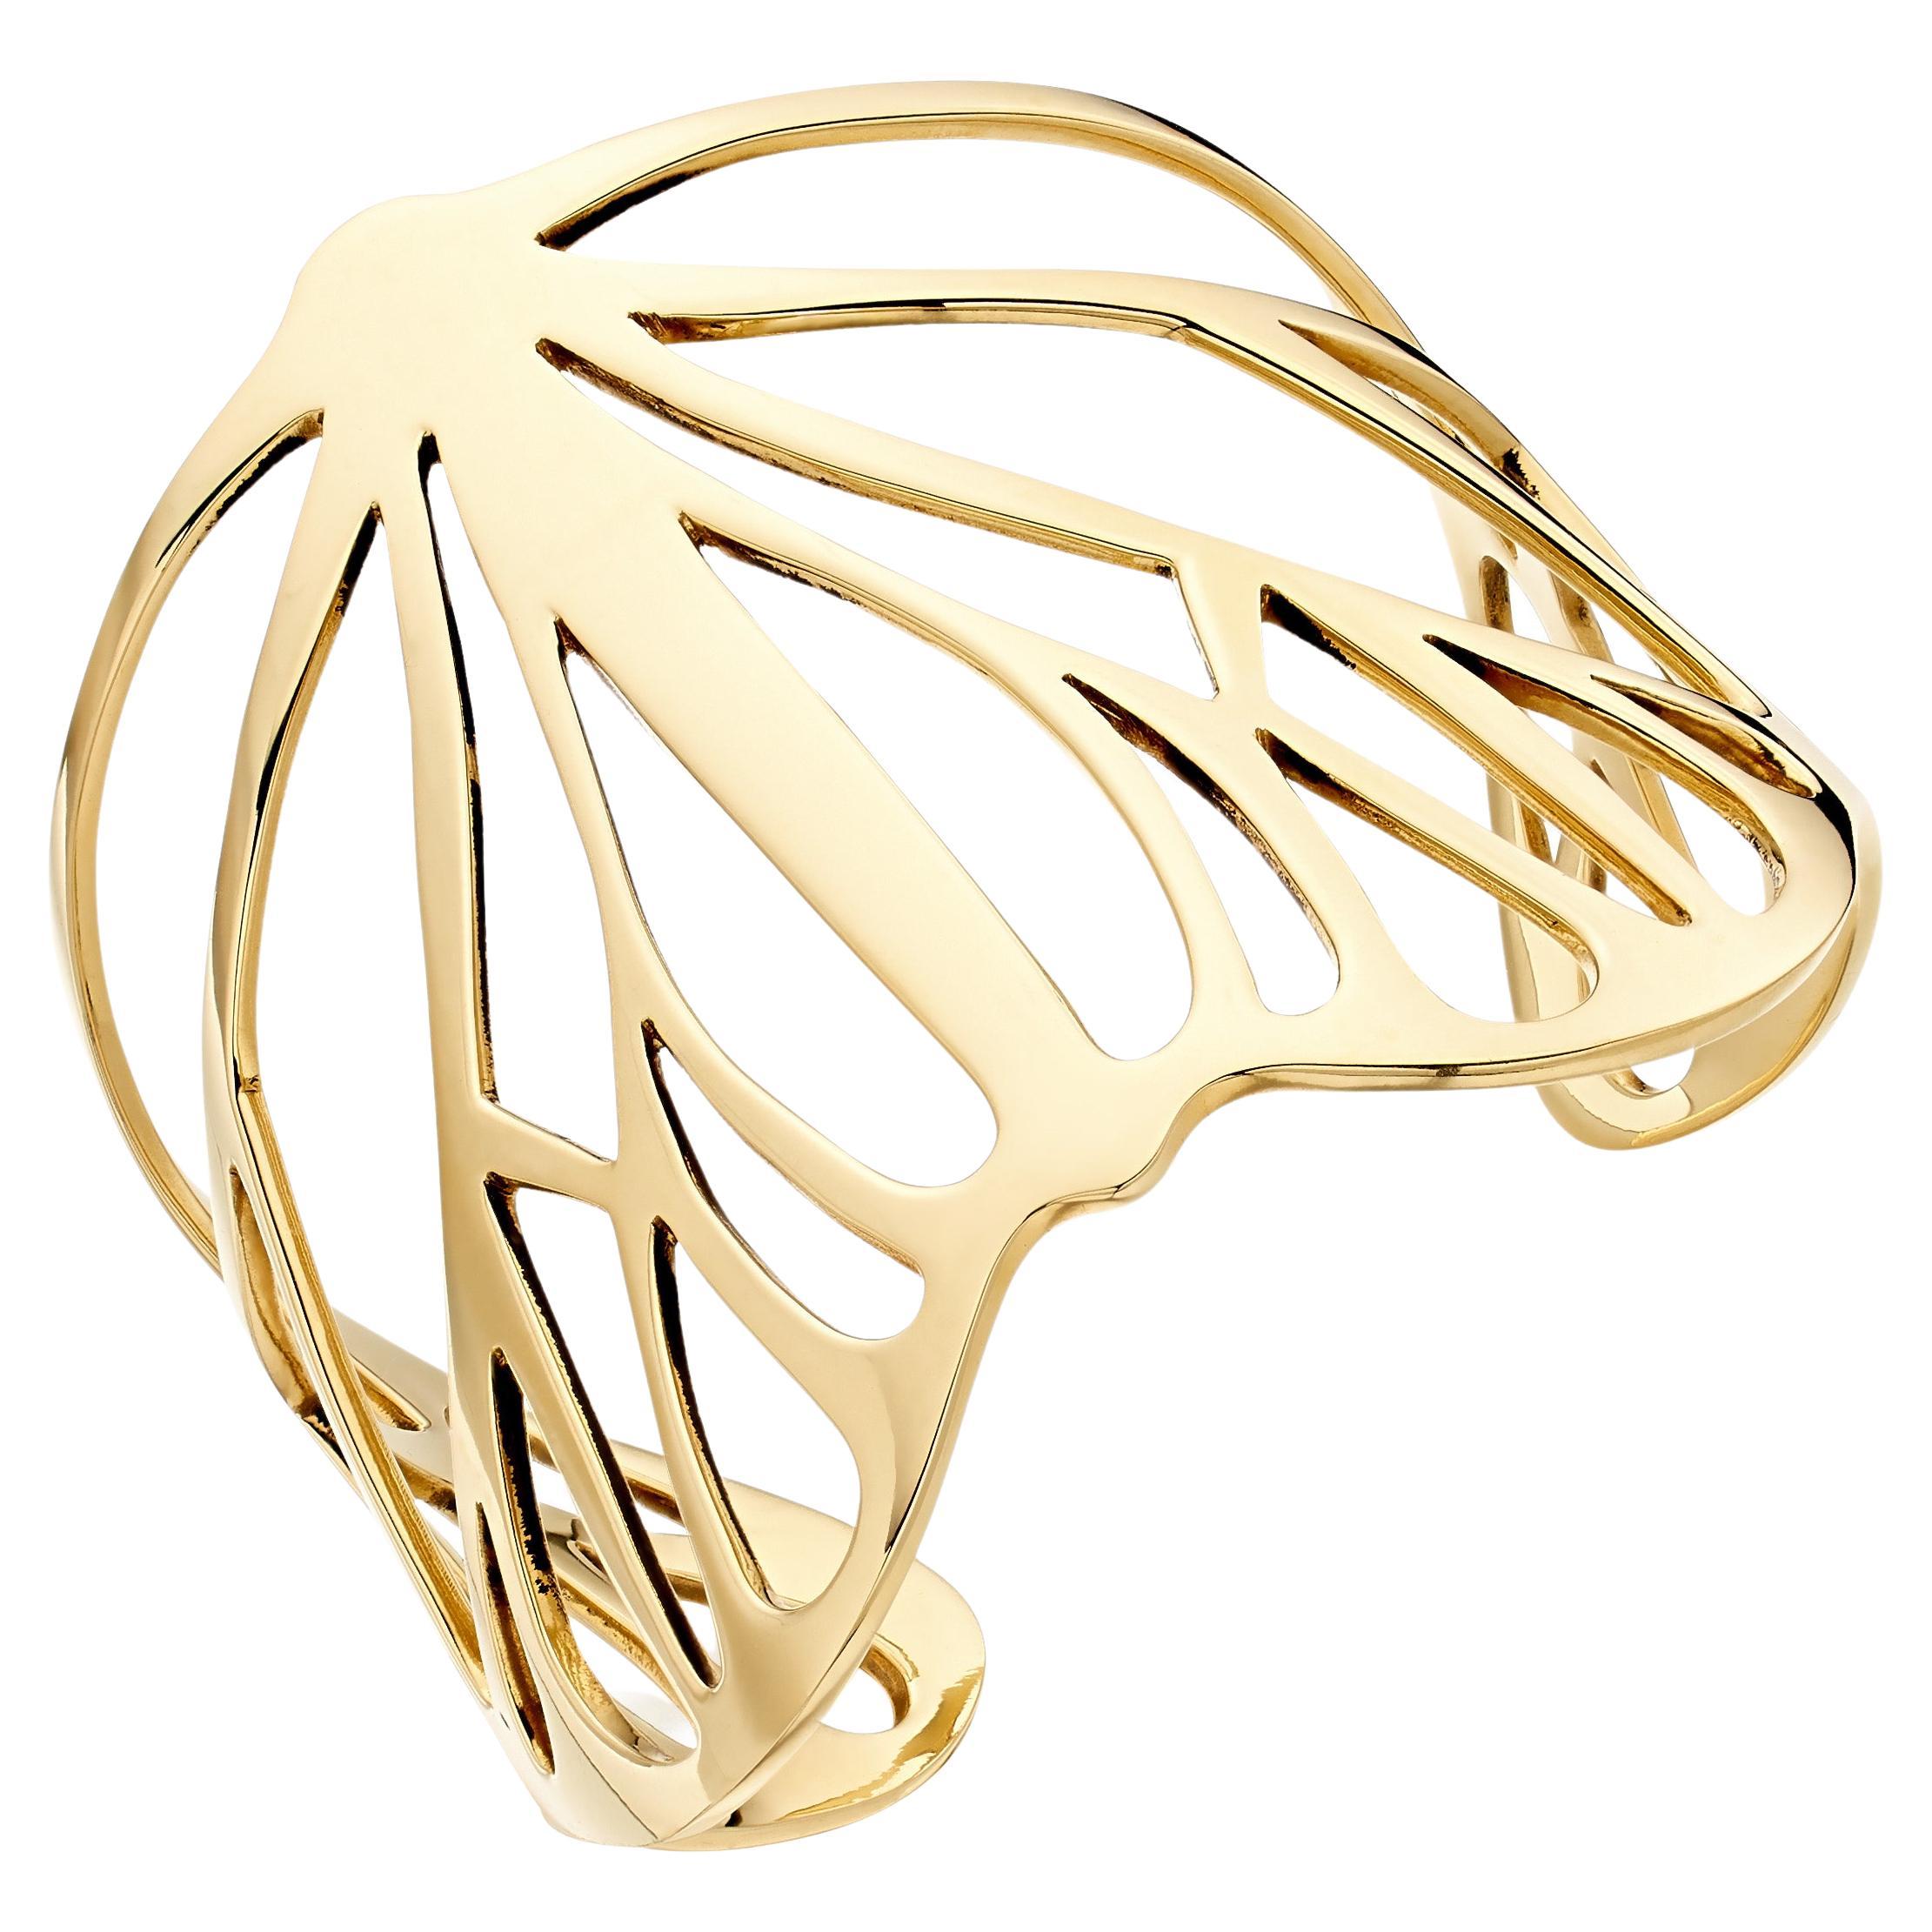 Lilly Hastedt Gold Butterfly Cuff